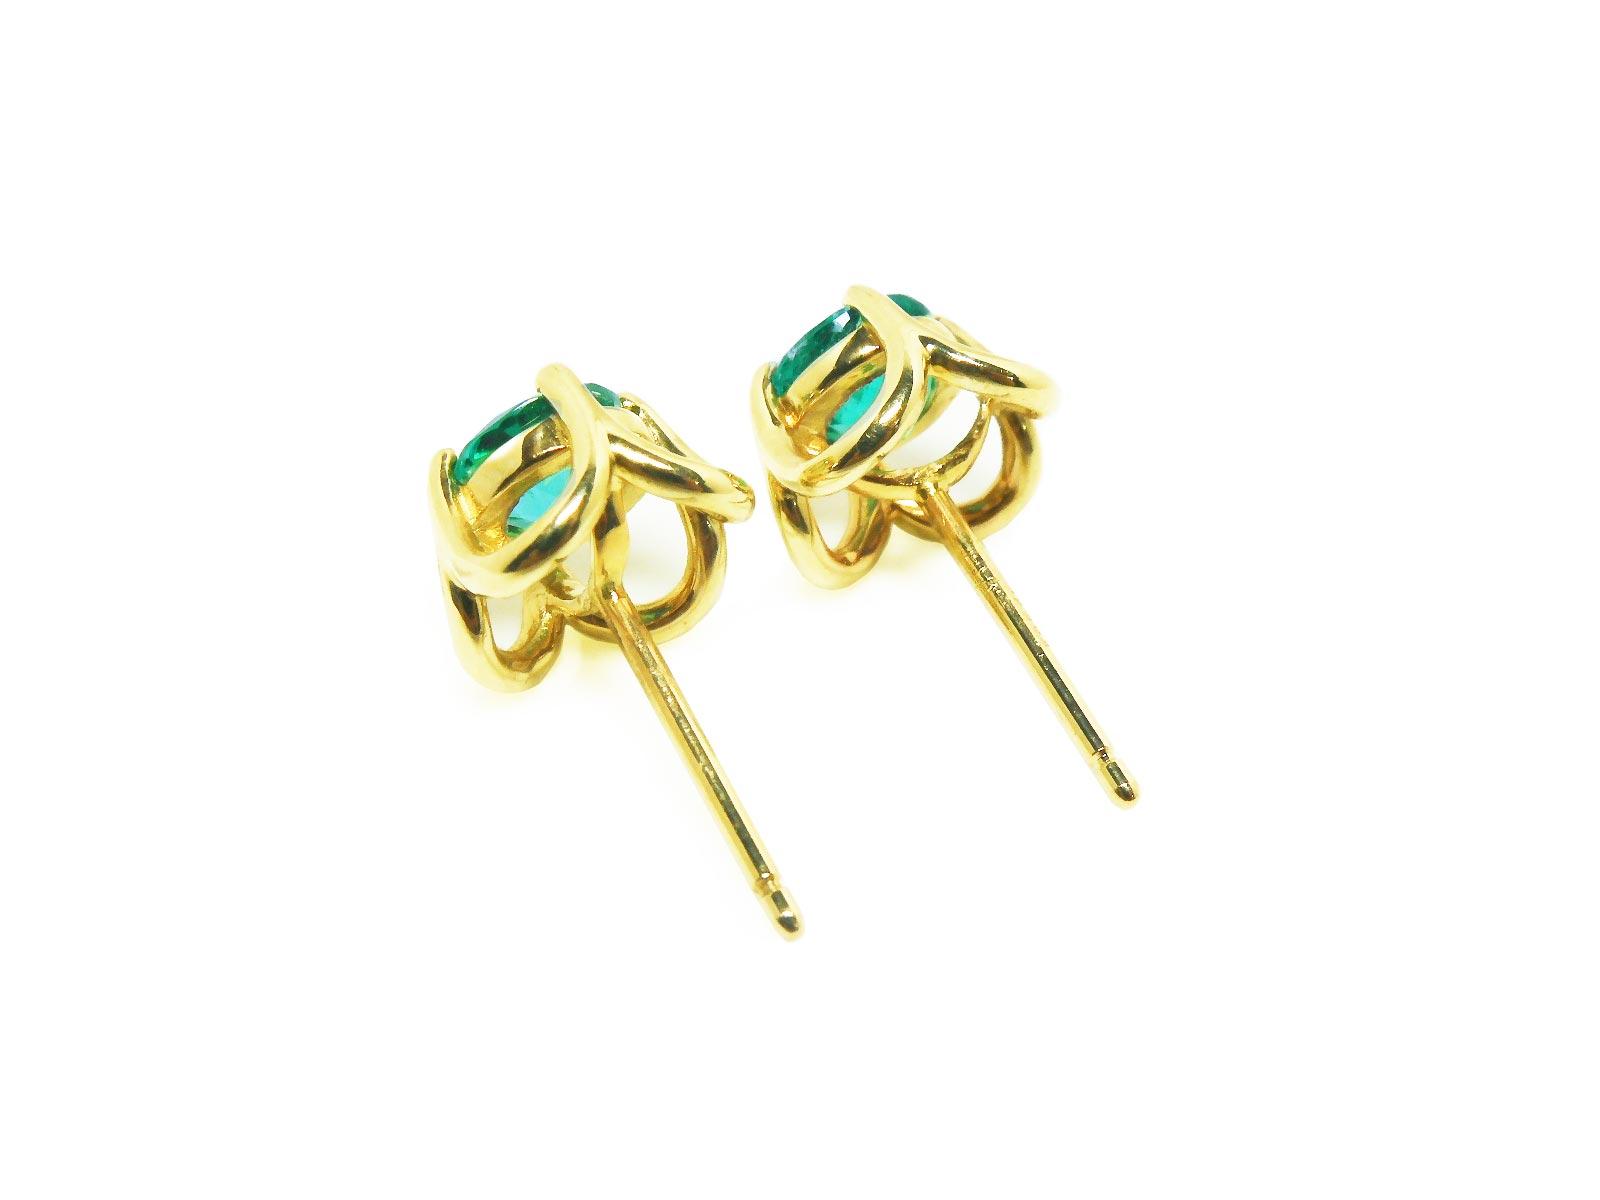 Round emerald stud earrings for sale